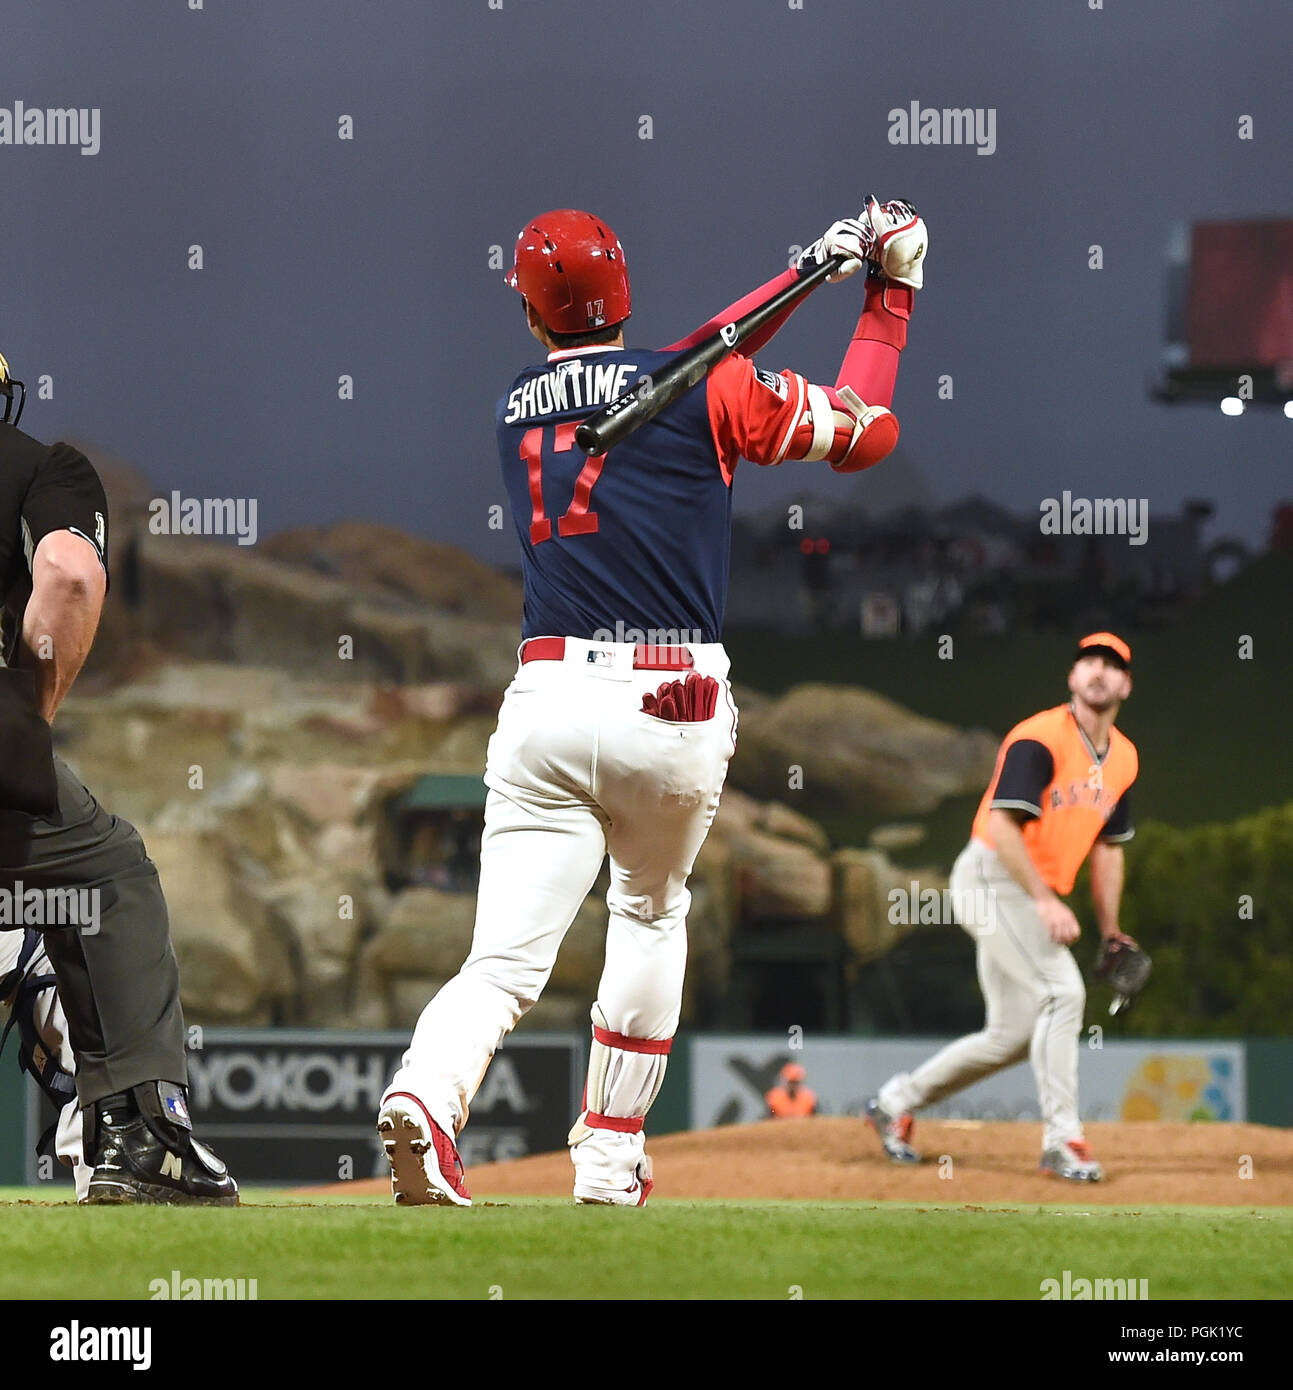 Los Angeles Angels designated hitter Shohei Ohtani wears a jersey with his  nickname SHOWTIME on the back as he hits a two-run home run off Houston  Astros starting pitcher Justin Verlander in